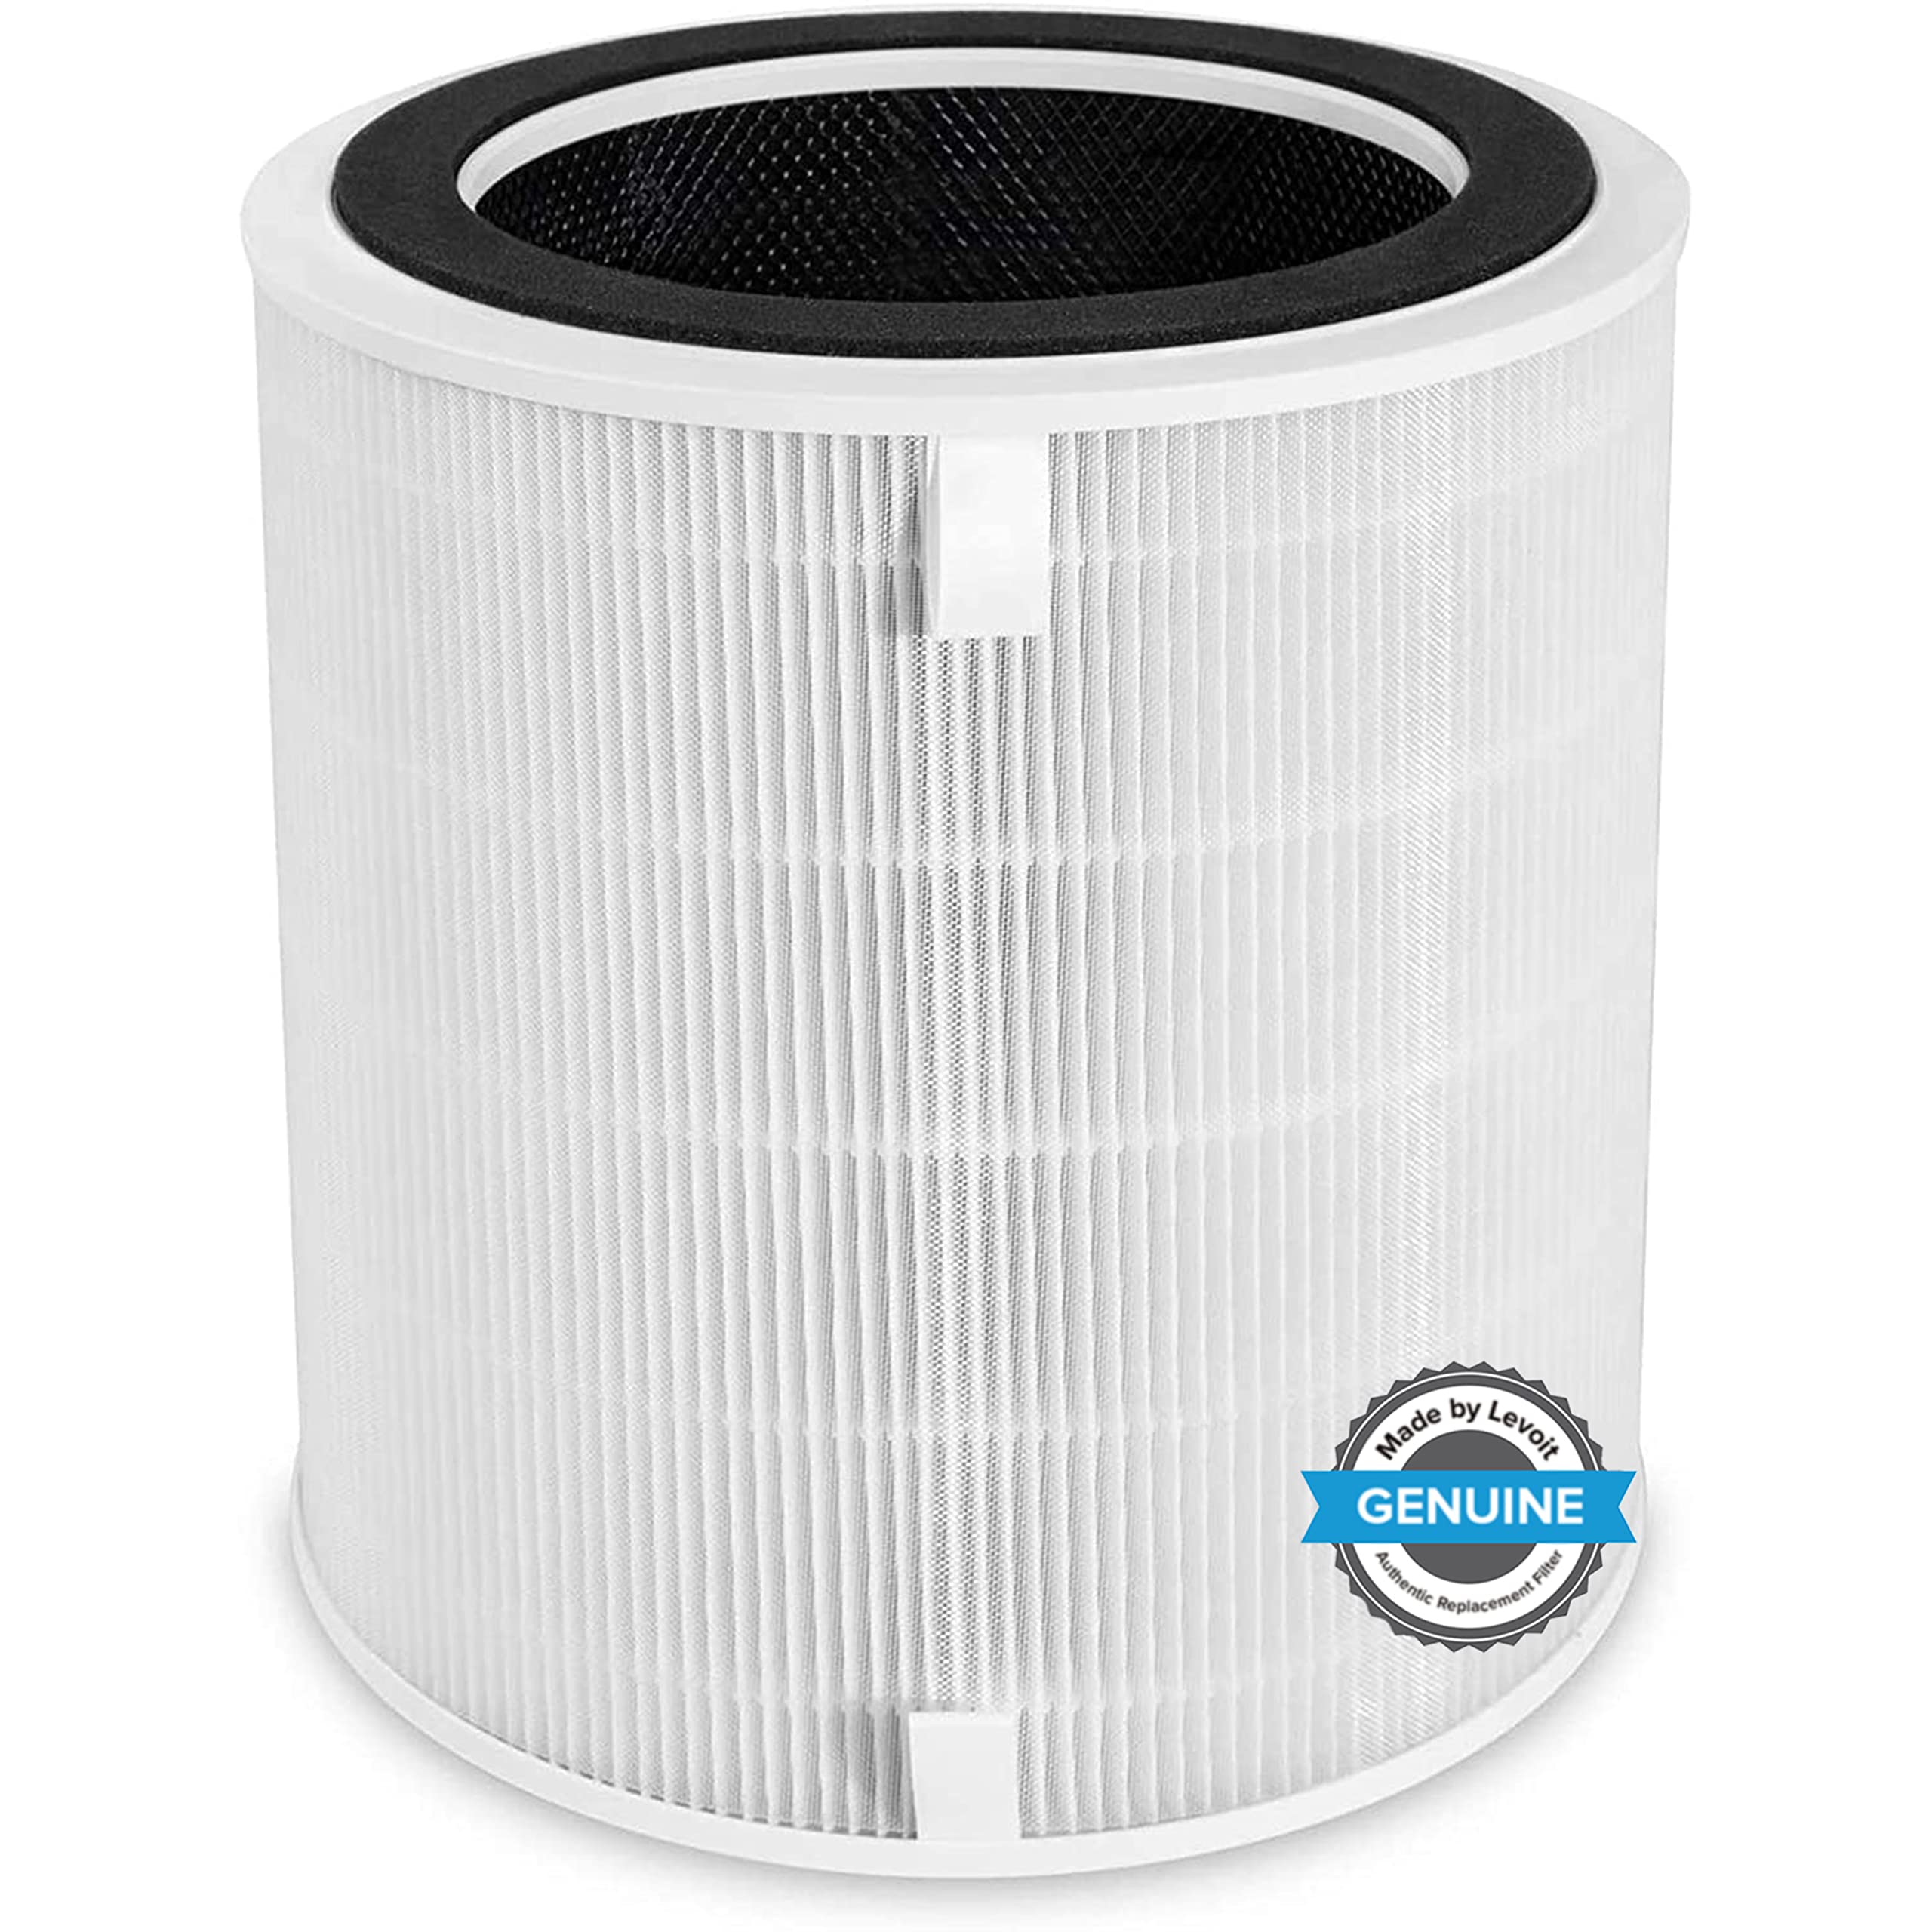 LEVOIT LV-H135 Air Purifier Replacement Filter, HEPA and High-Efficiency Activated Carbon Filters Set, LV-H135-RF, 1 Pack, White & Core P350 Air Purifier Replacement Filter, 3-in-1 HEPA Pet Allergies